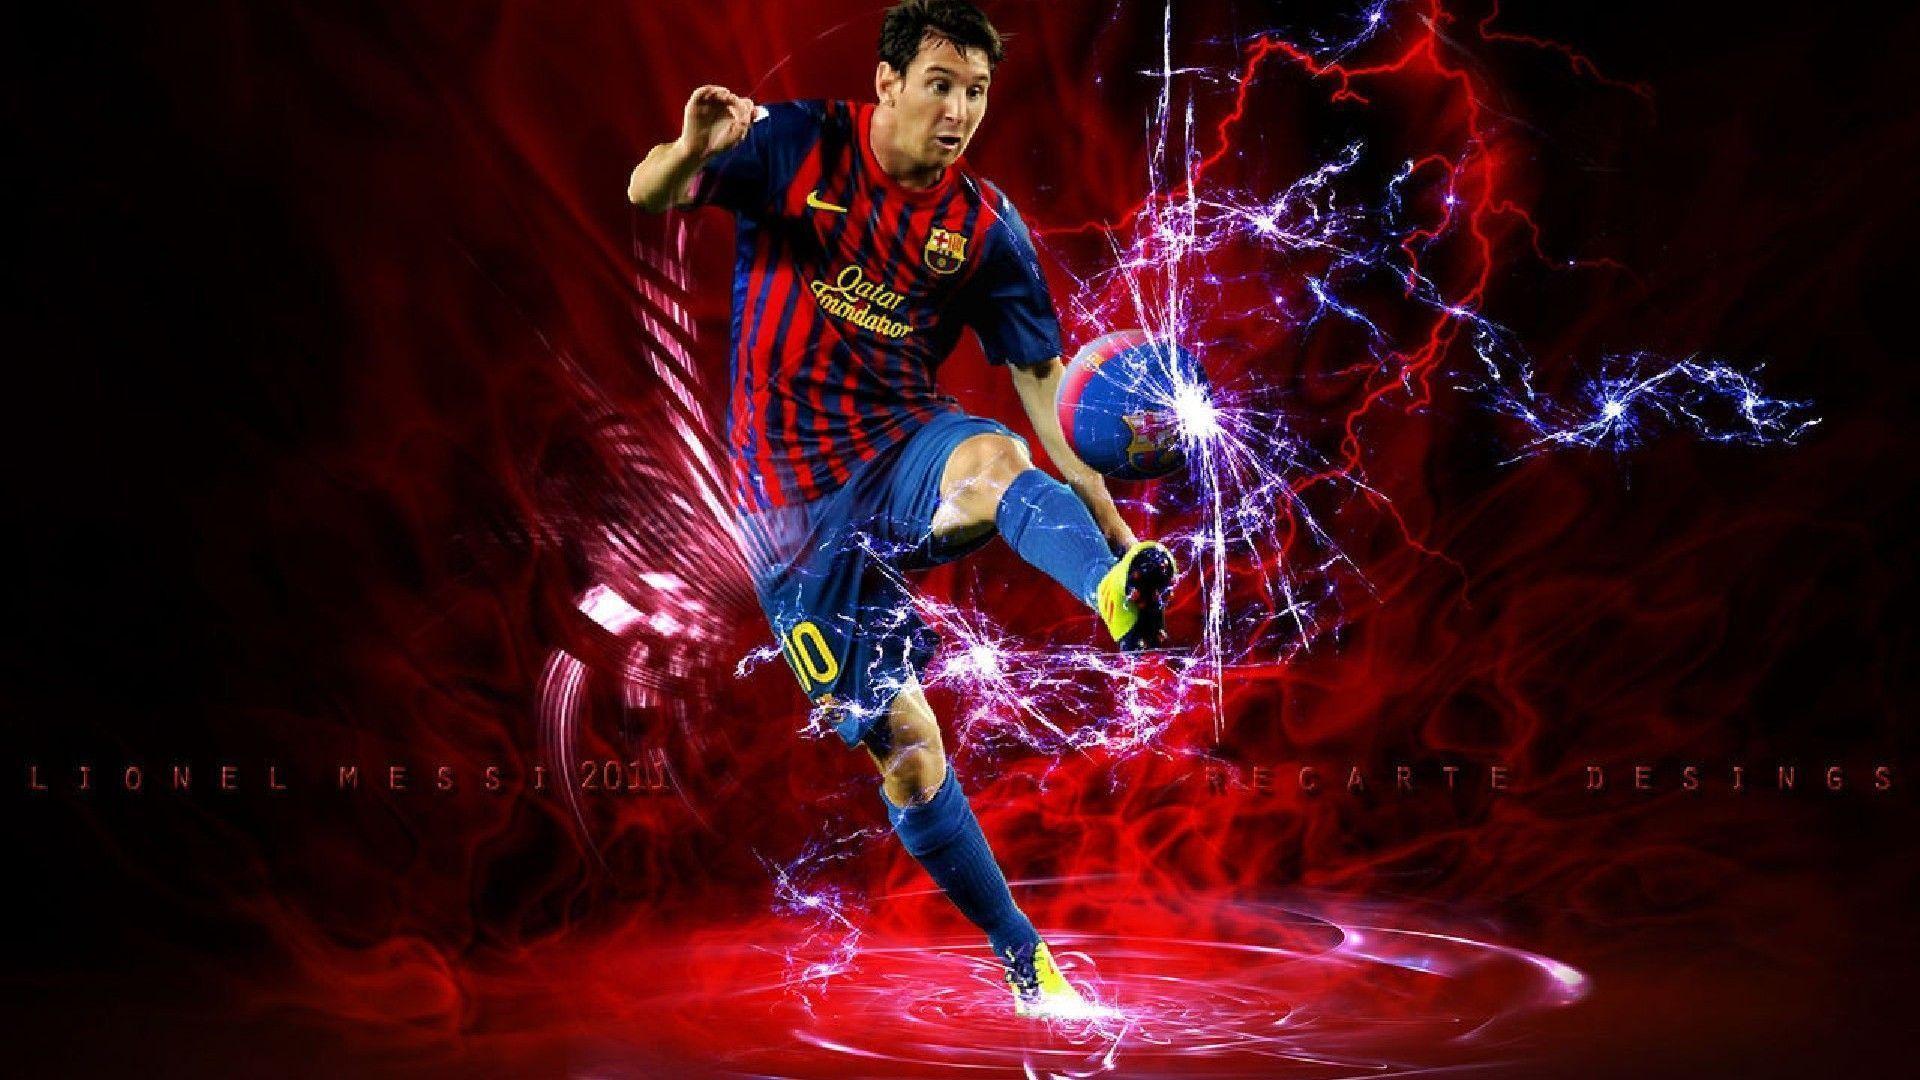 Lionel Messi Wallpapers 13 Hd Backgrounds 9 HD Wallpapers